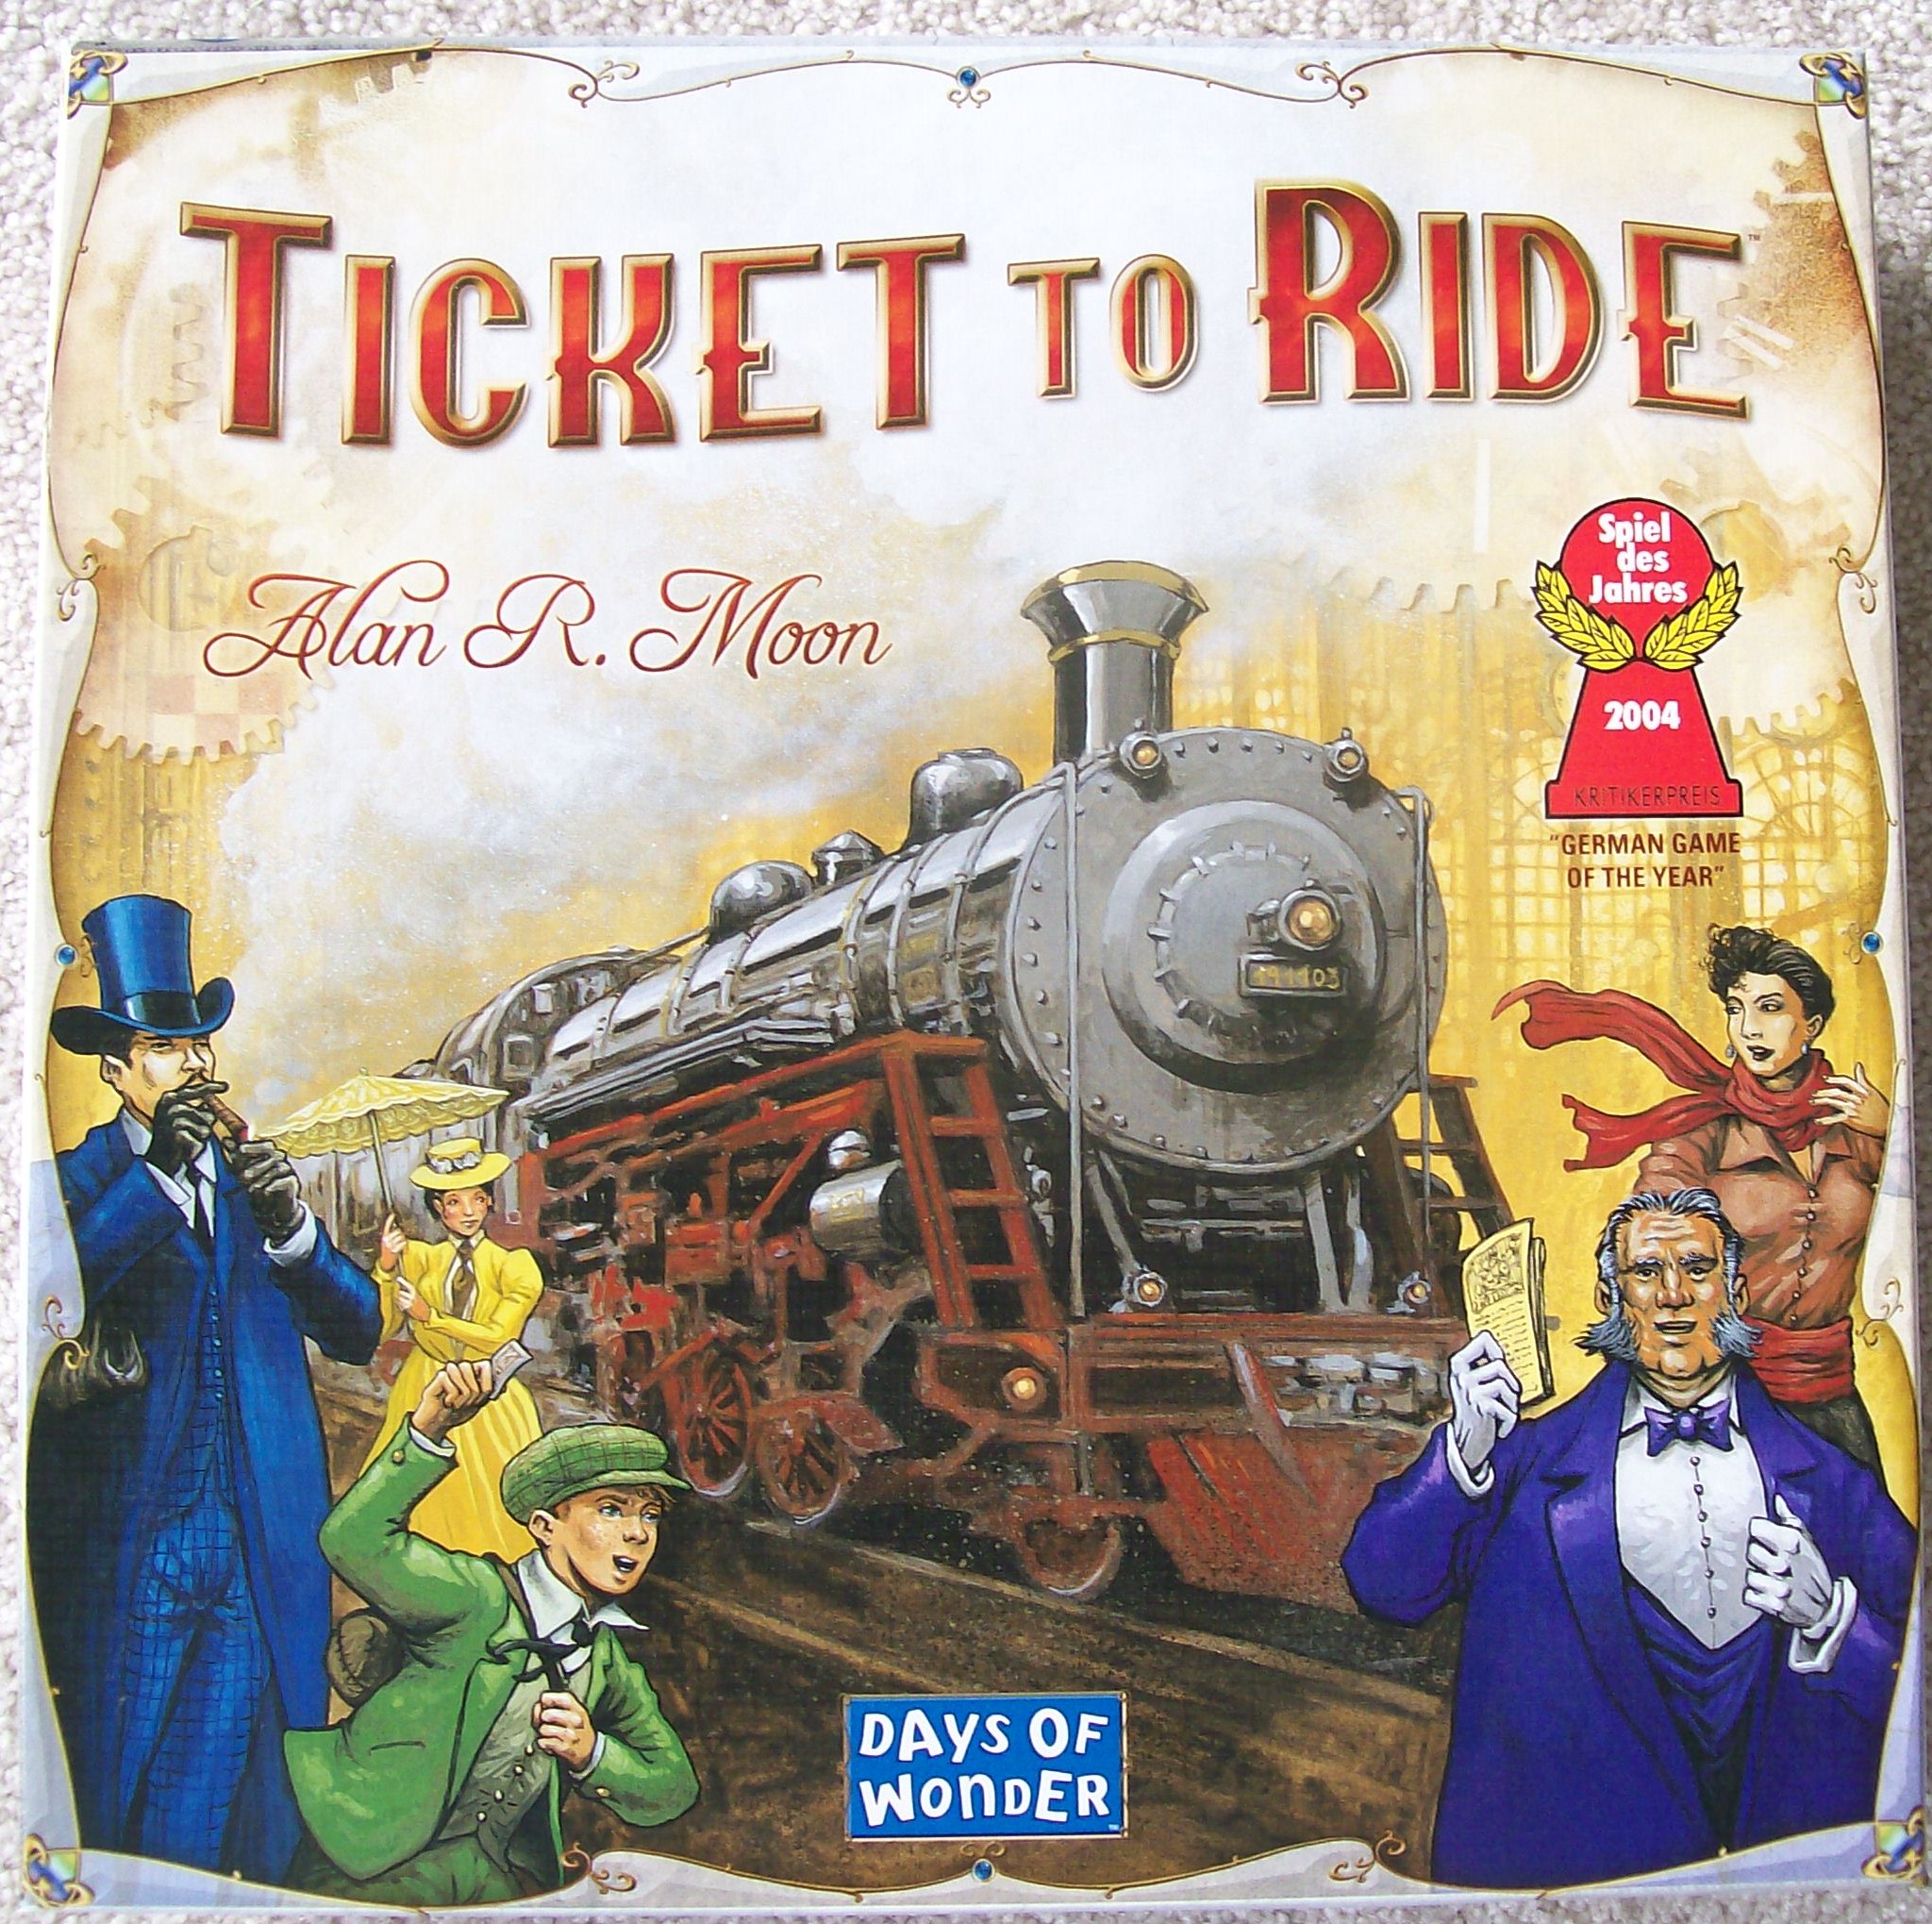 Ideas for Game Night: All Aboard!